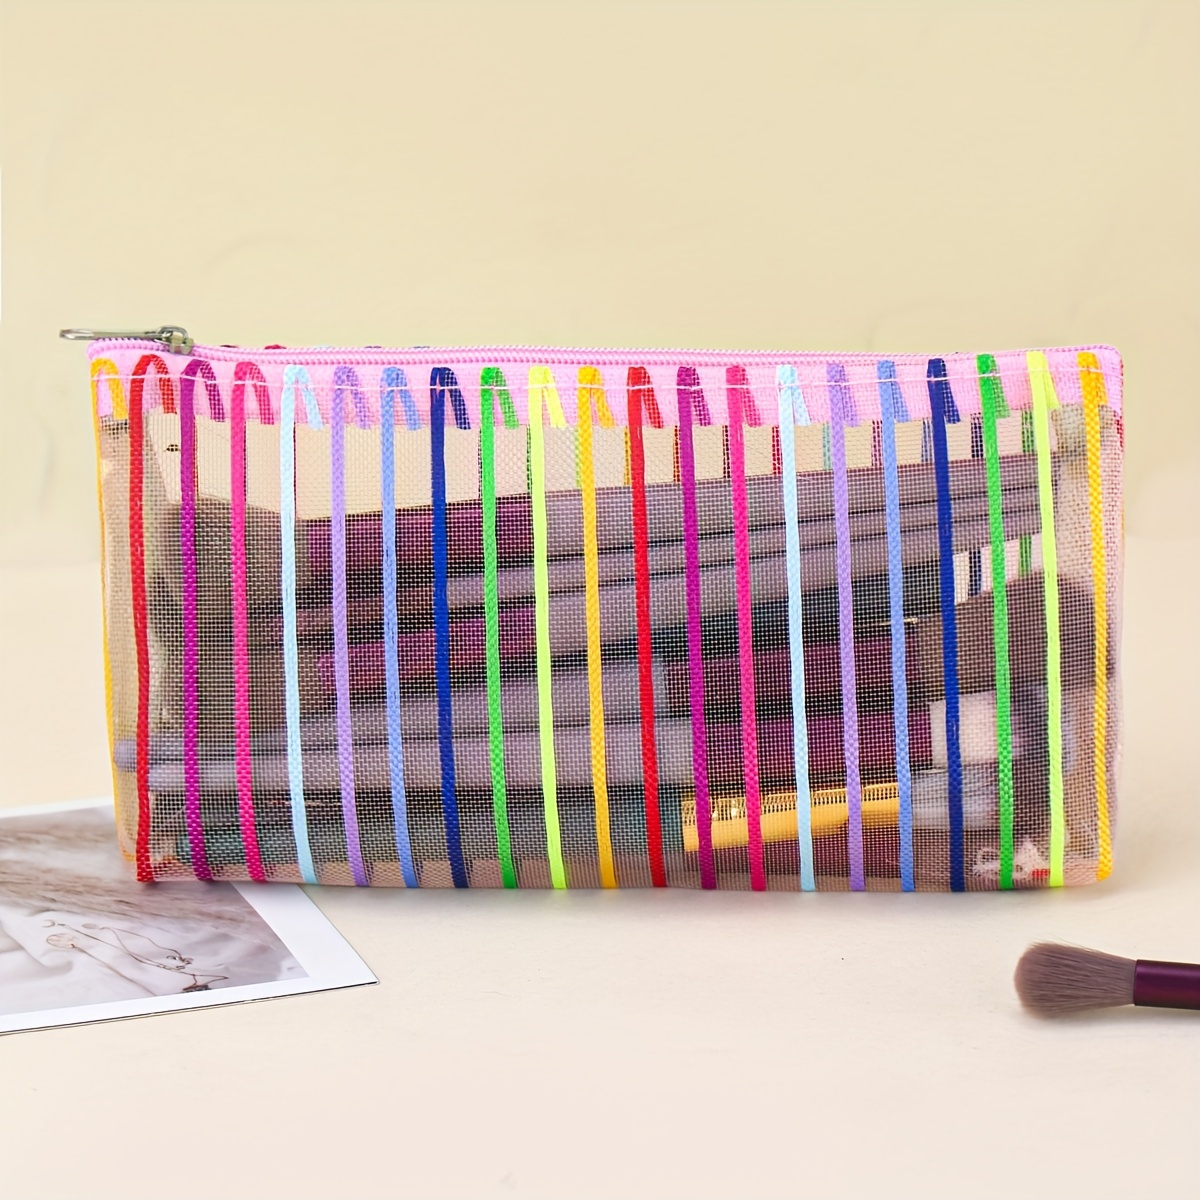 

Minimalist And Stylish Mesh Makeup Bag With Colorful Stripes, Transparent Storage Bag For Makeup Brushes And Lipstick